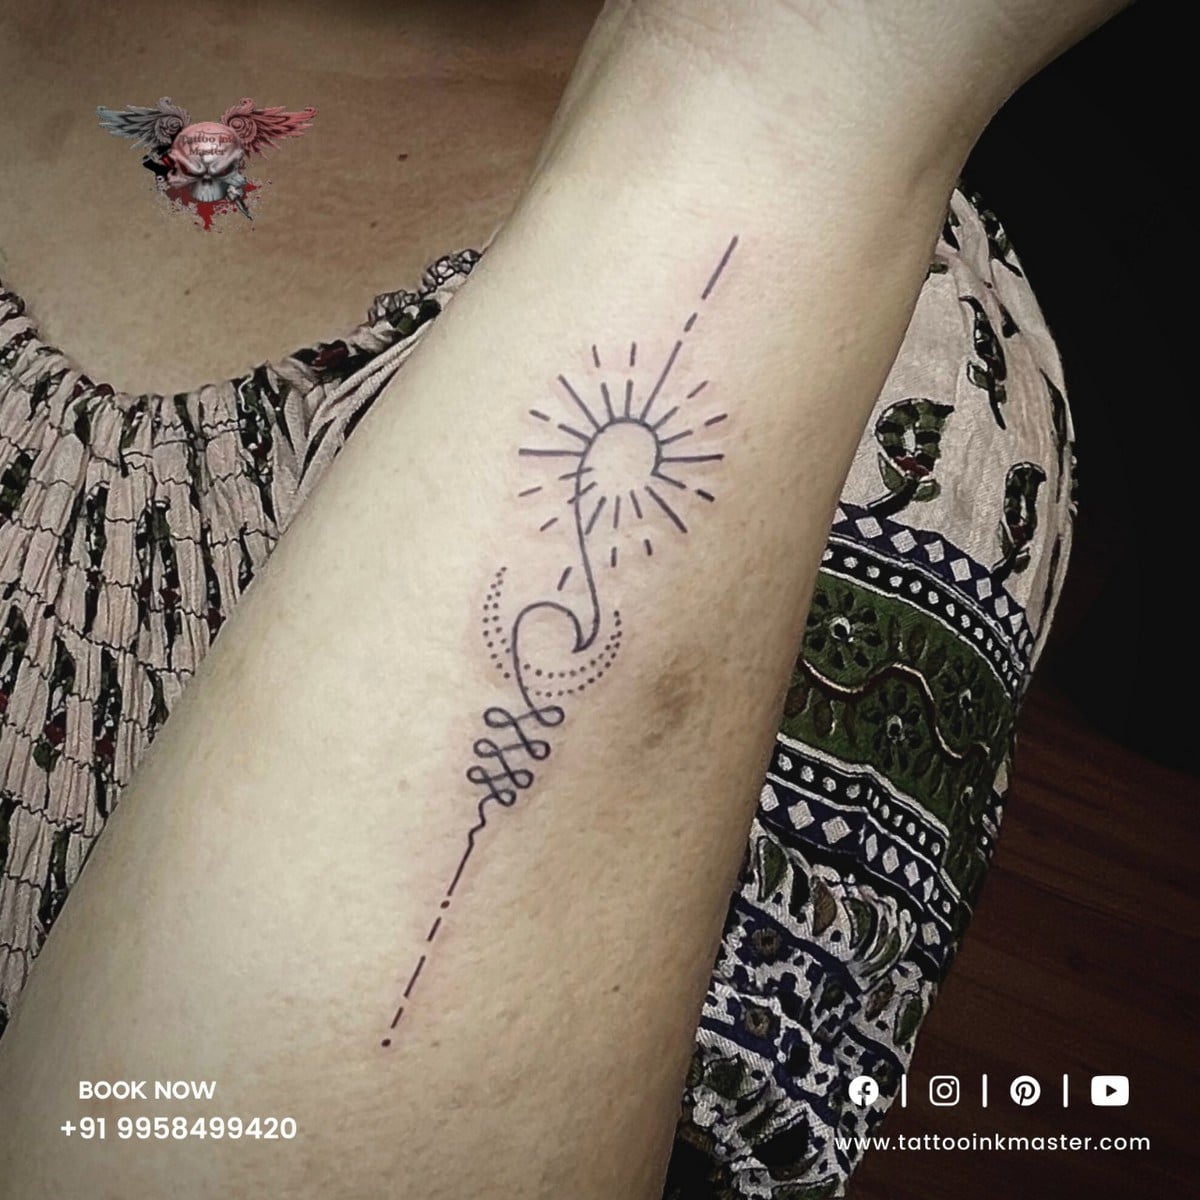 Sun Tattoo for Parlour at Rs 499/inch in Bengaluru | ID: 21985772655